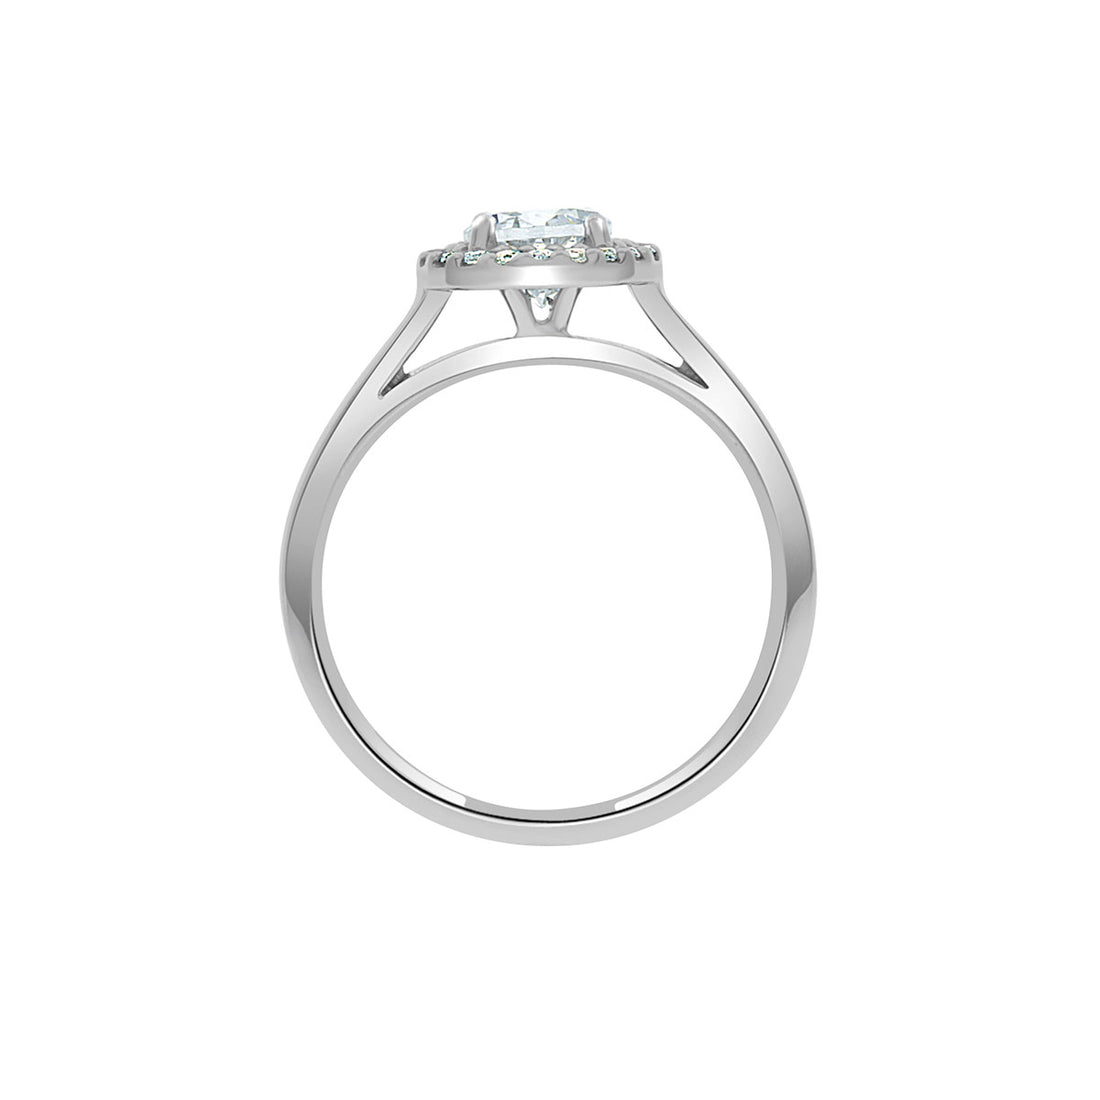 Round Vintage Engagement Ring in a vertical position against a white background